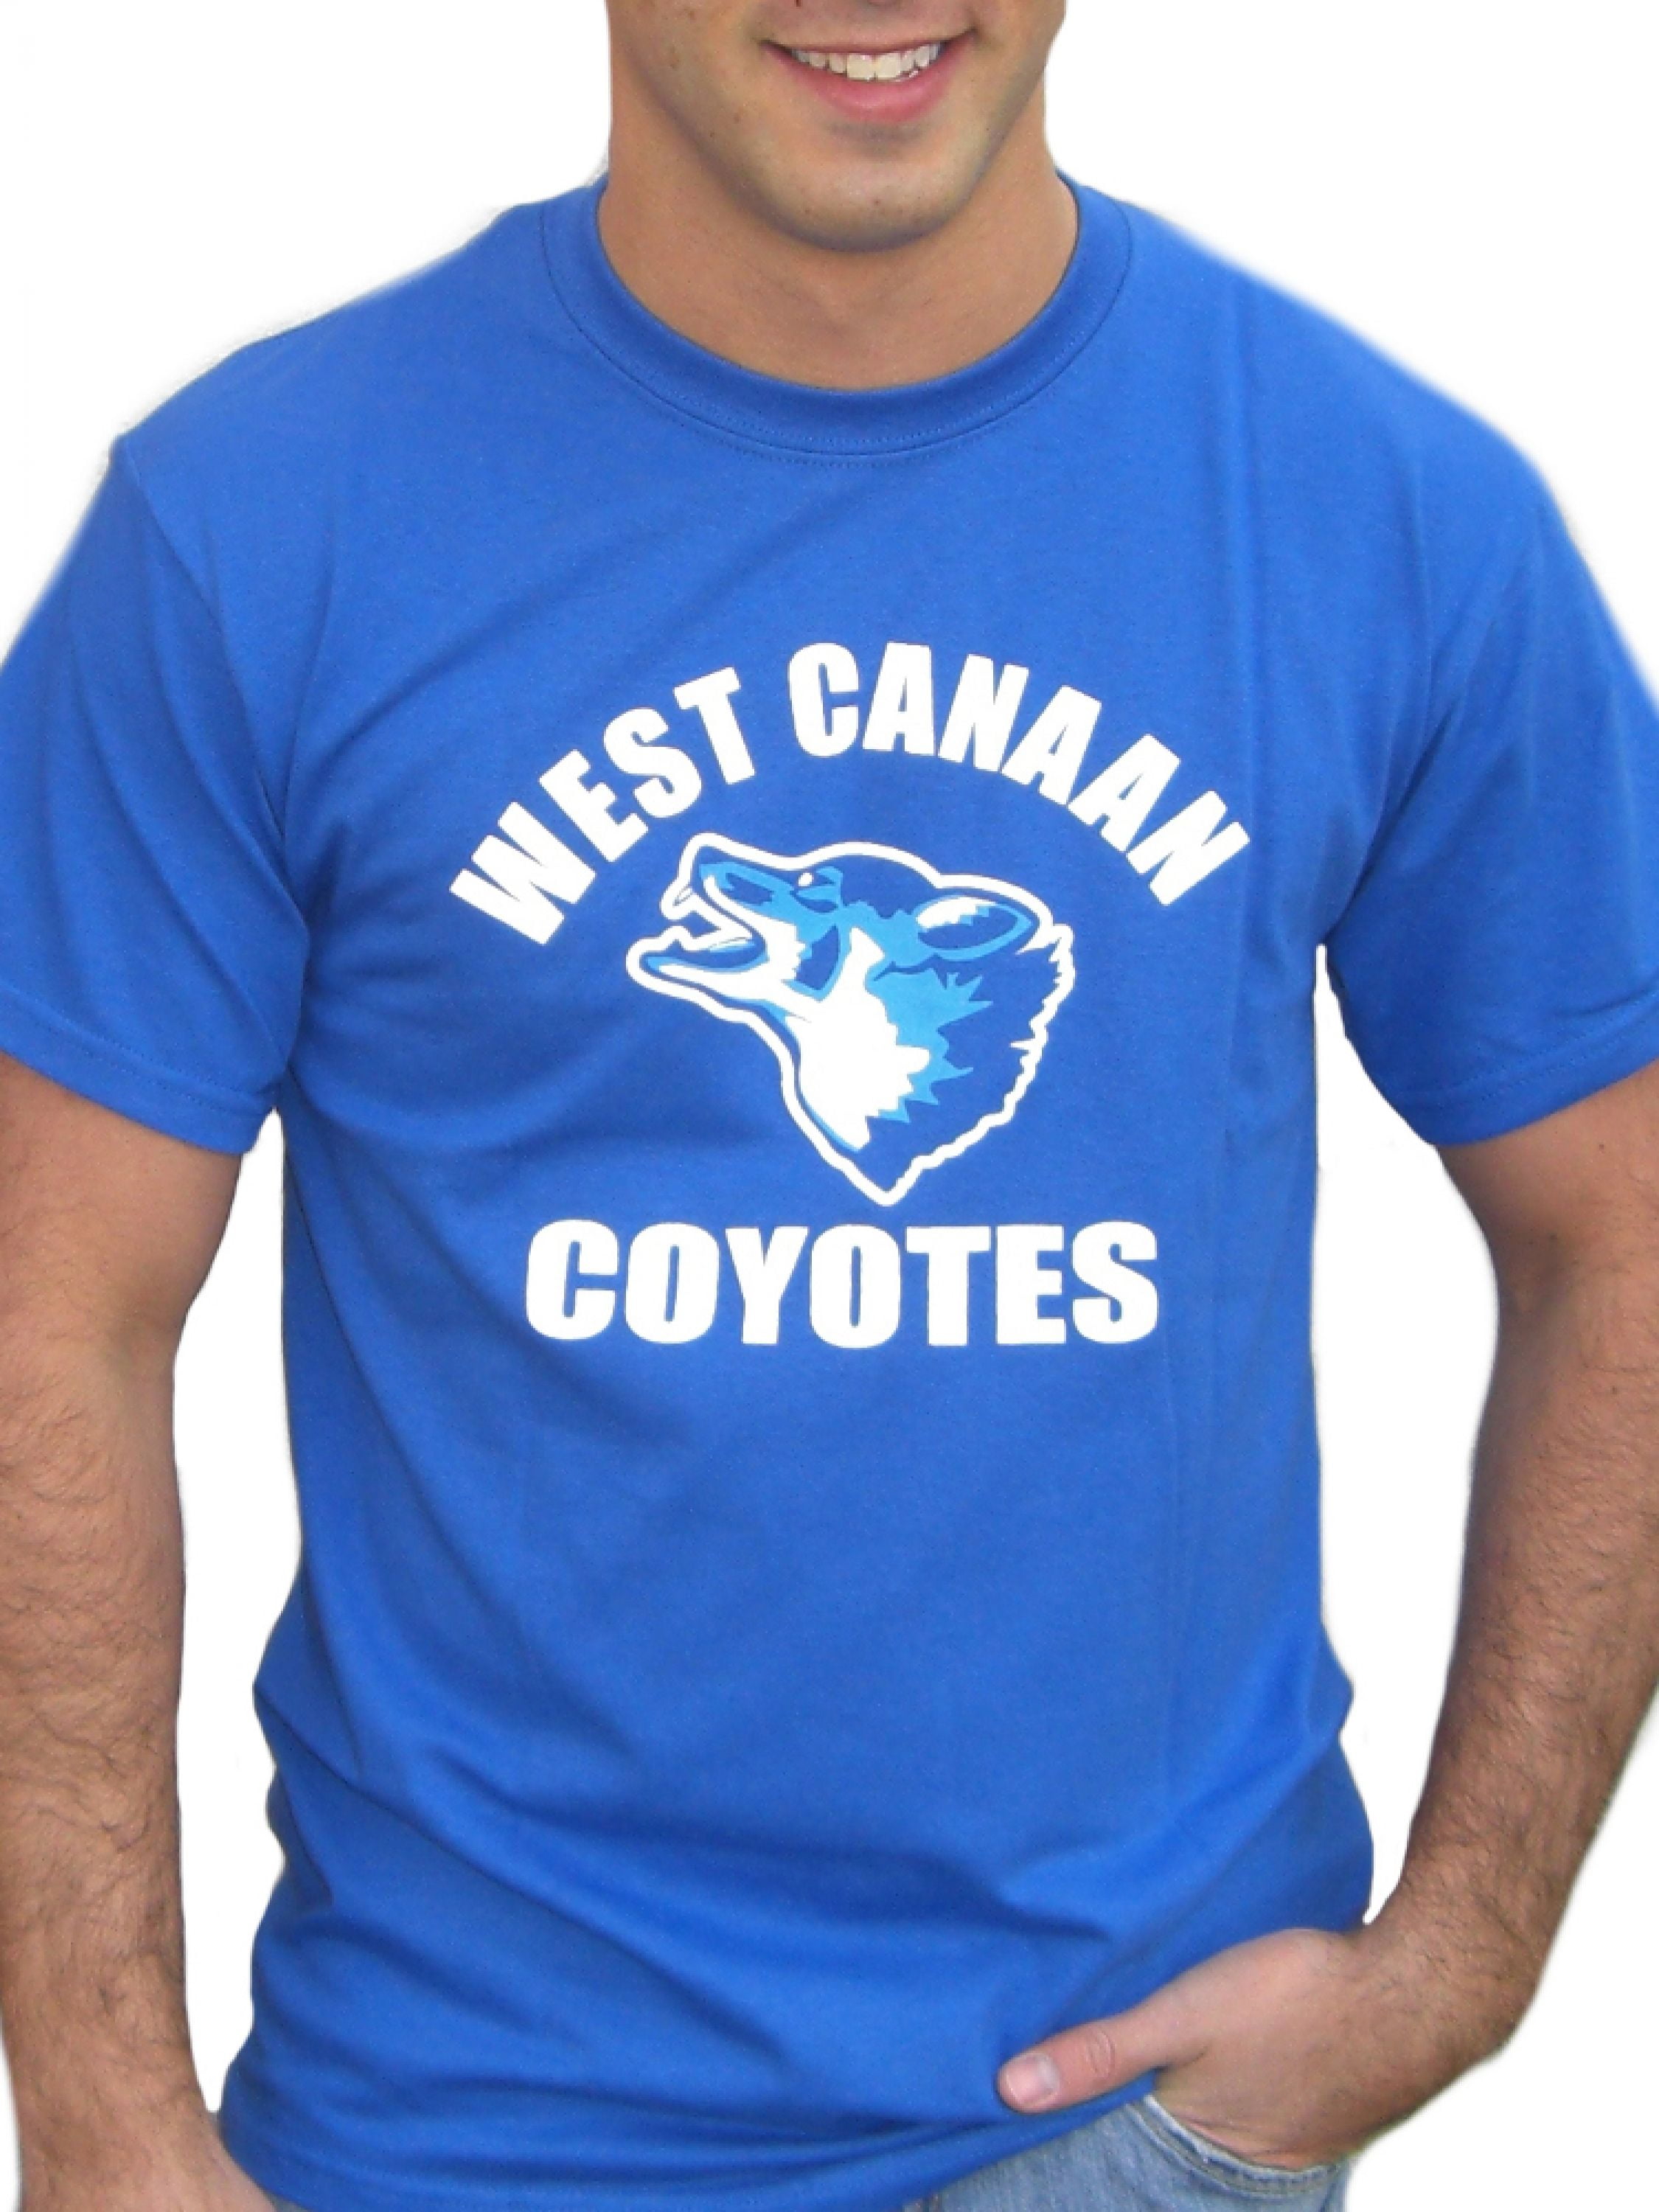 Varsity Blues West Canaan Coyotes Movie T Shirt